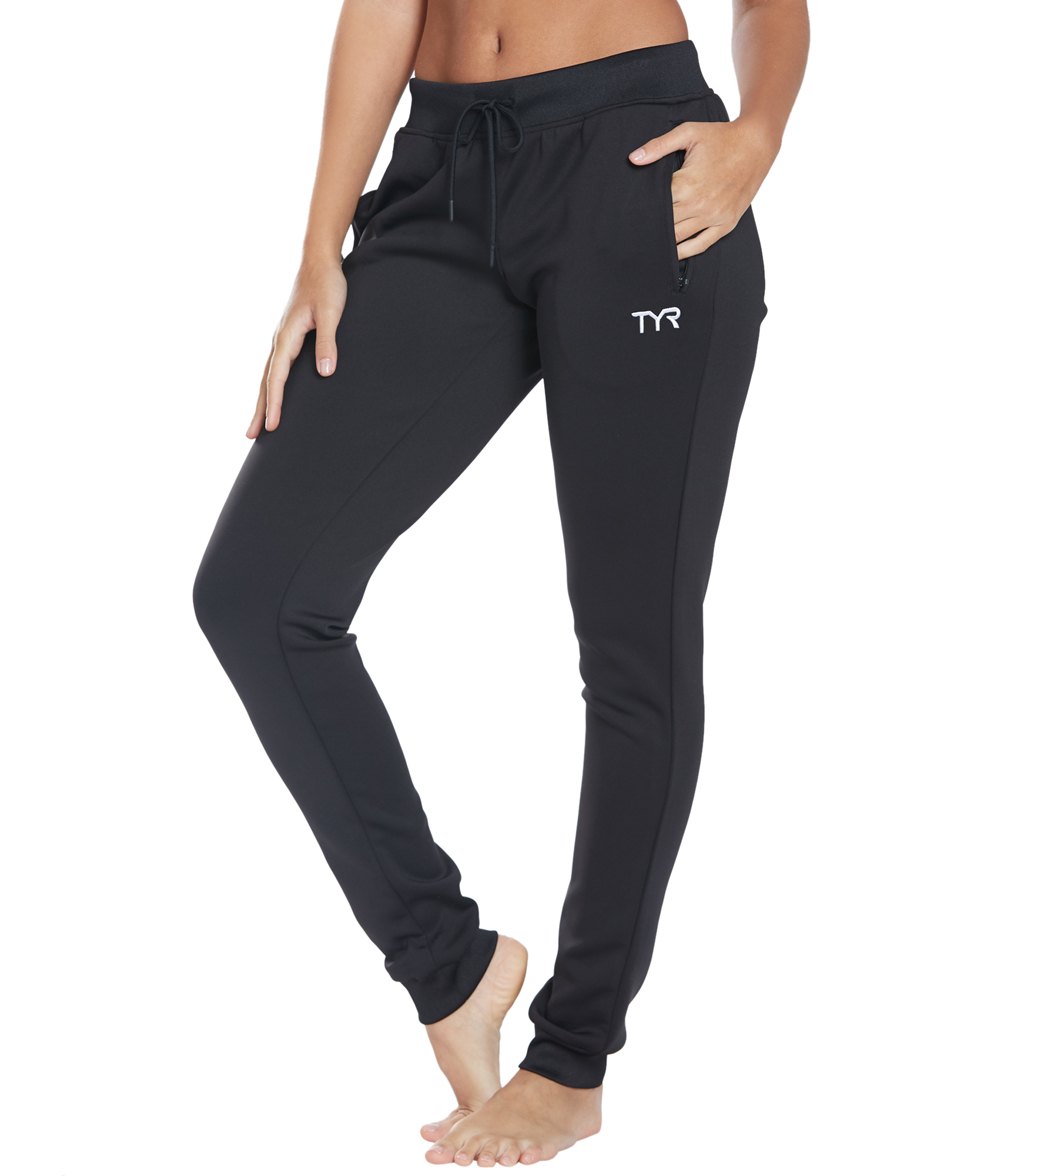 TYR Women's Team Jogger Pants - Black Xs Size X-Small Polyester - Swimoutlet.com